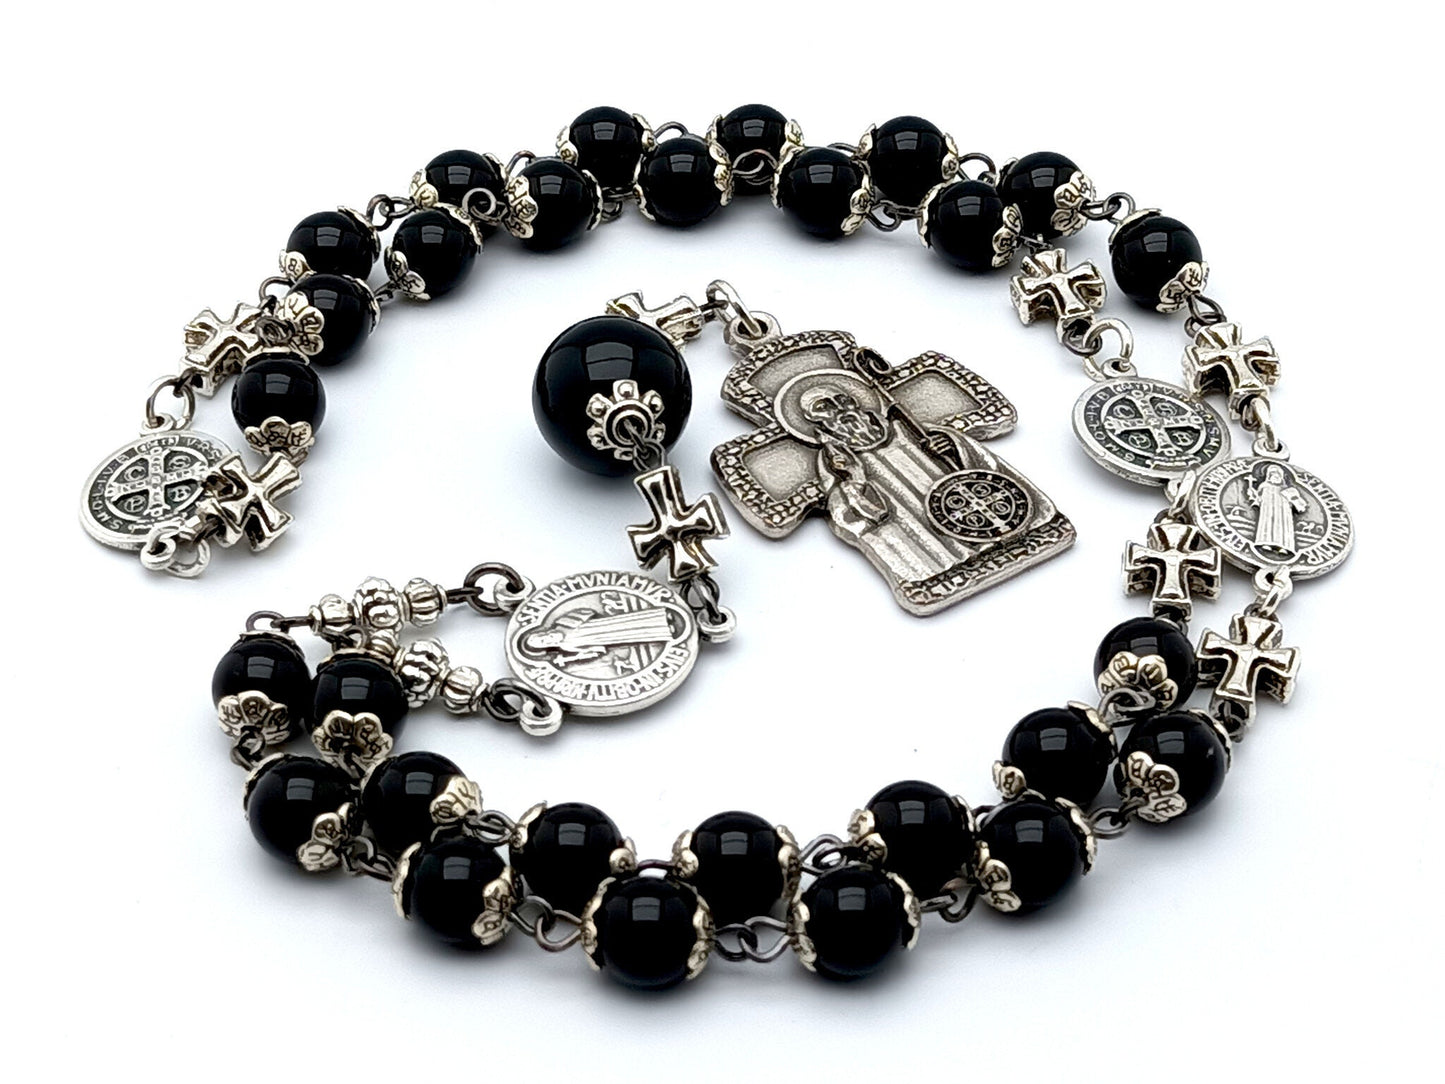 Saint Benedict unique rosary beads prayer chapet with onyx gemstone beads, silver Benedict medals and protector medal.